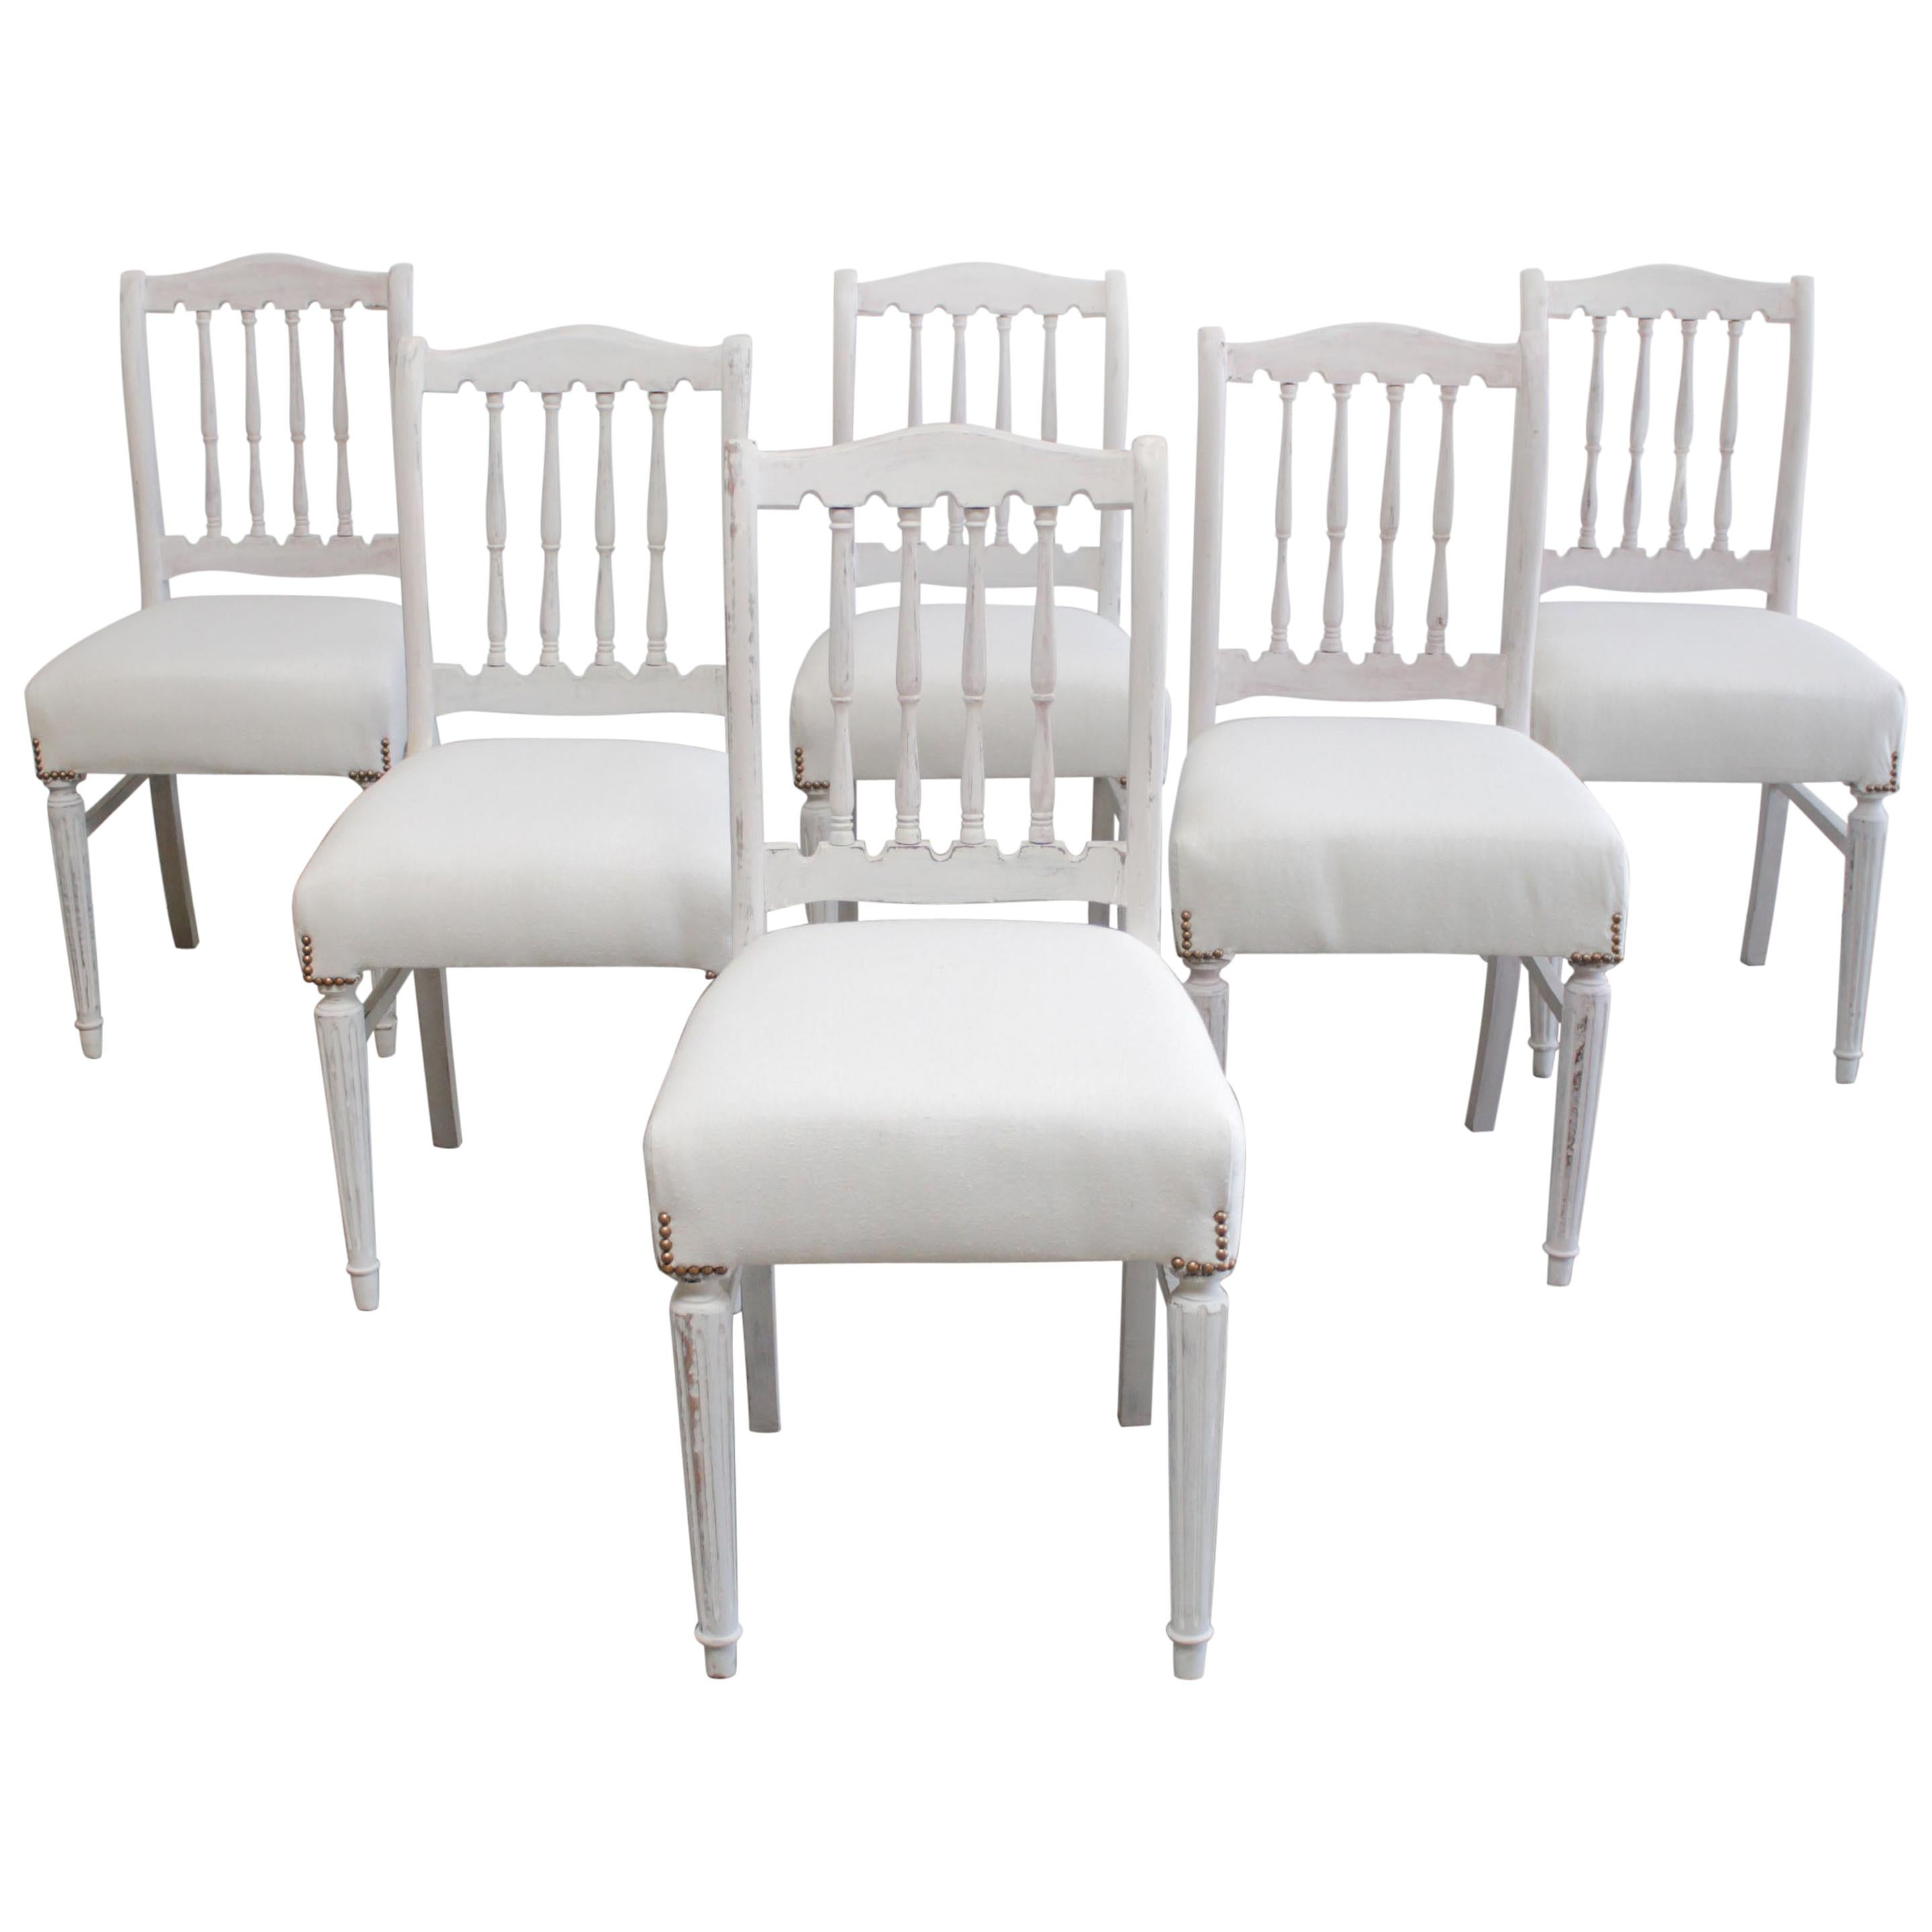 Set of 6 Vintage Painted and Upholstered Swedish Style Dining Chairs For Sale